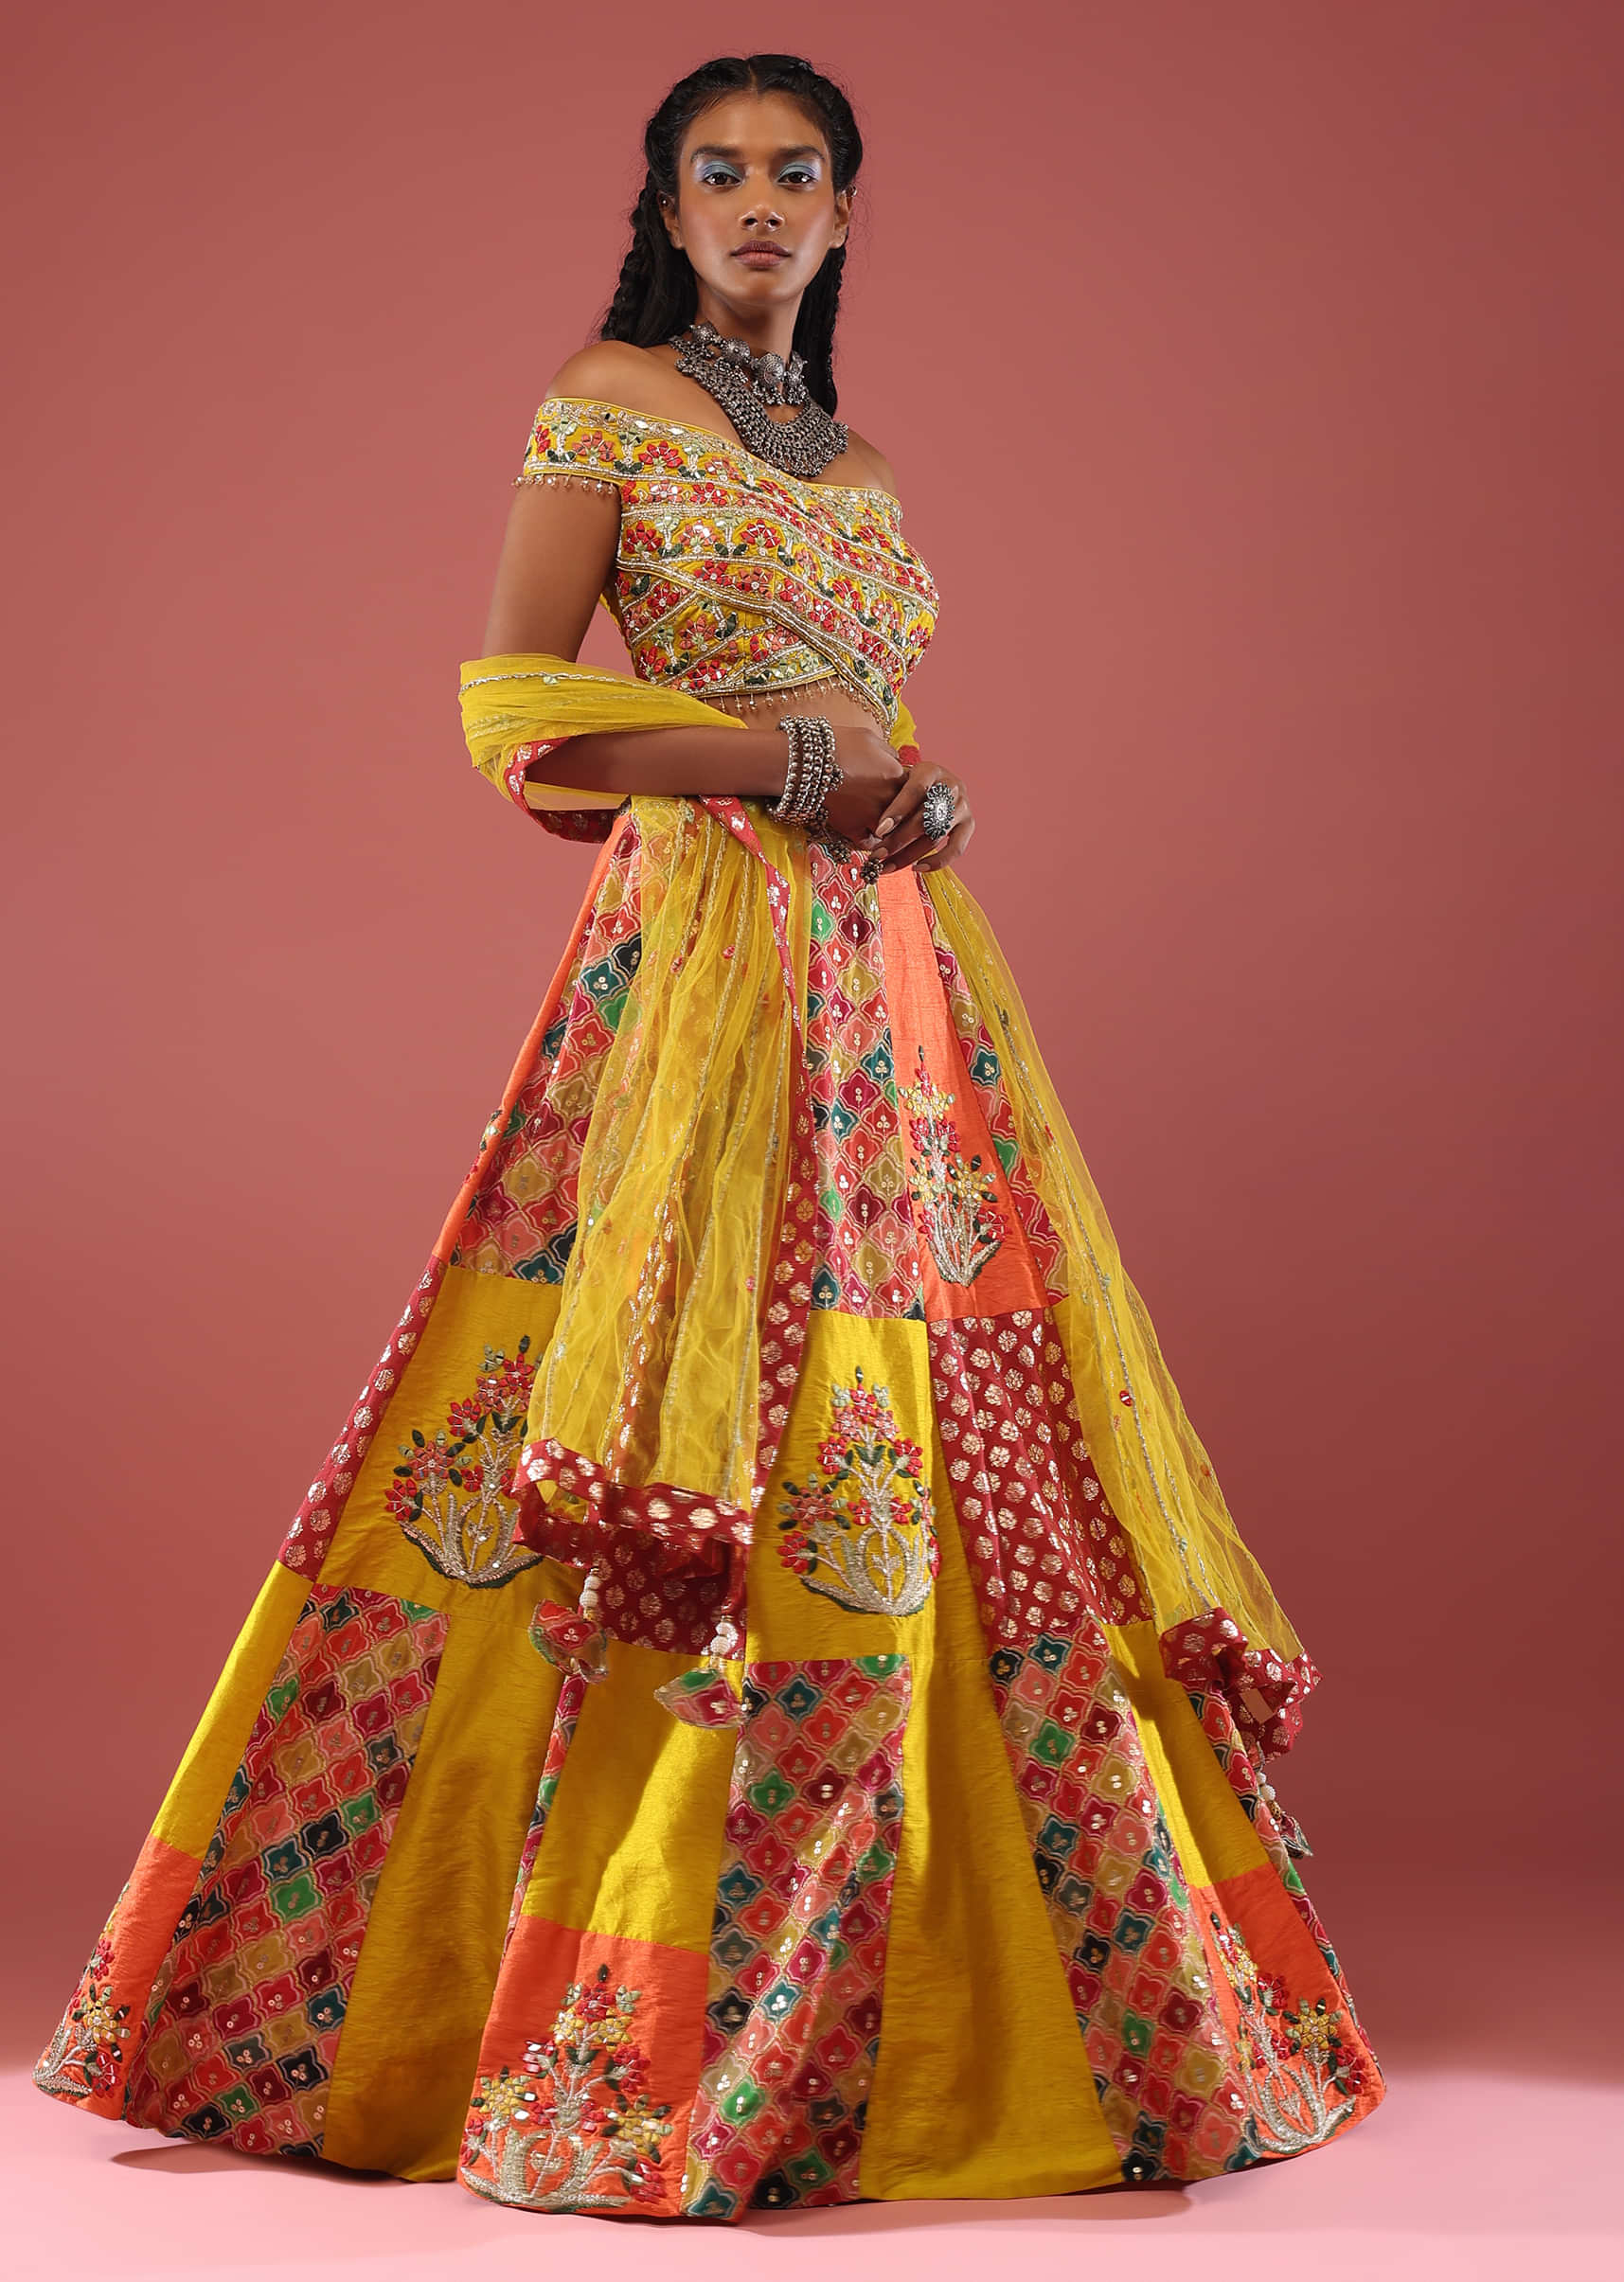 Cyber Yellow Lehenga Choli With Intricate Patchwork In Mirror Work, Brocade Weave And Moroccan Print